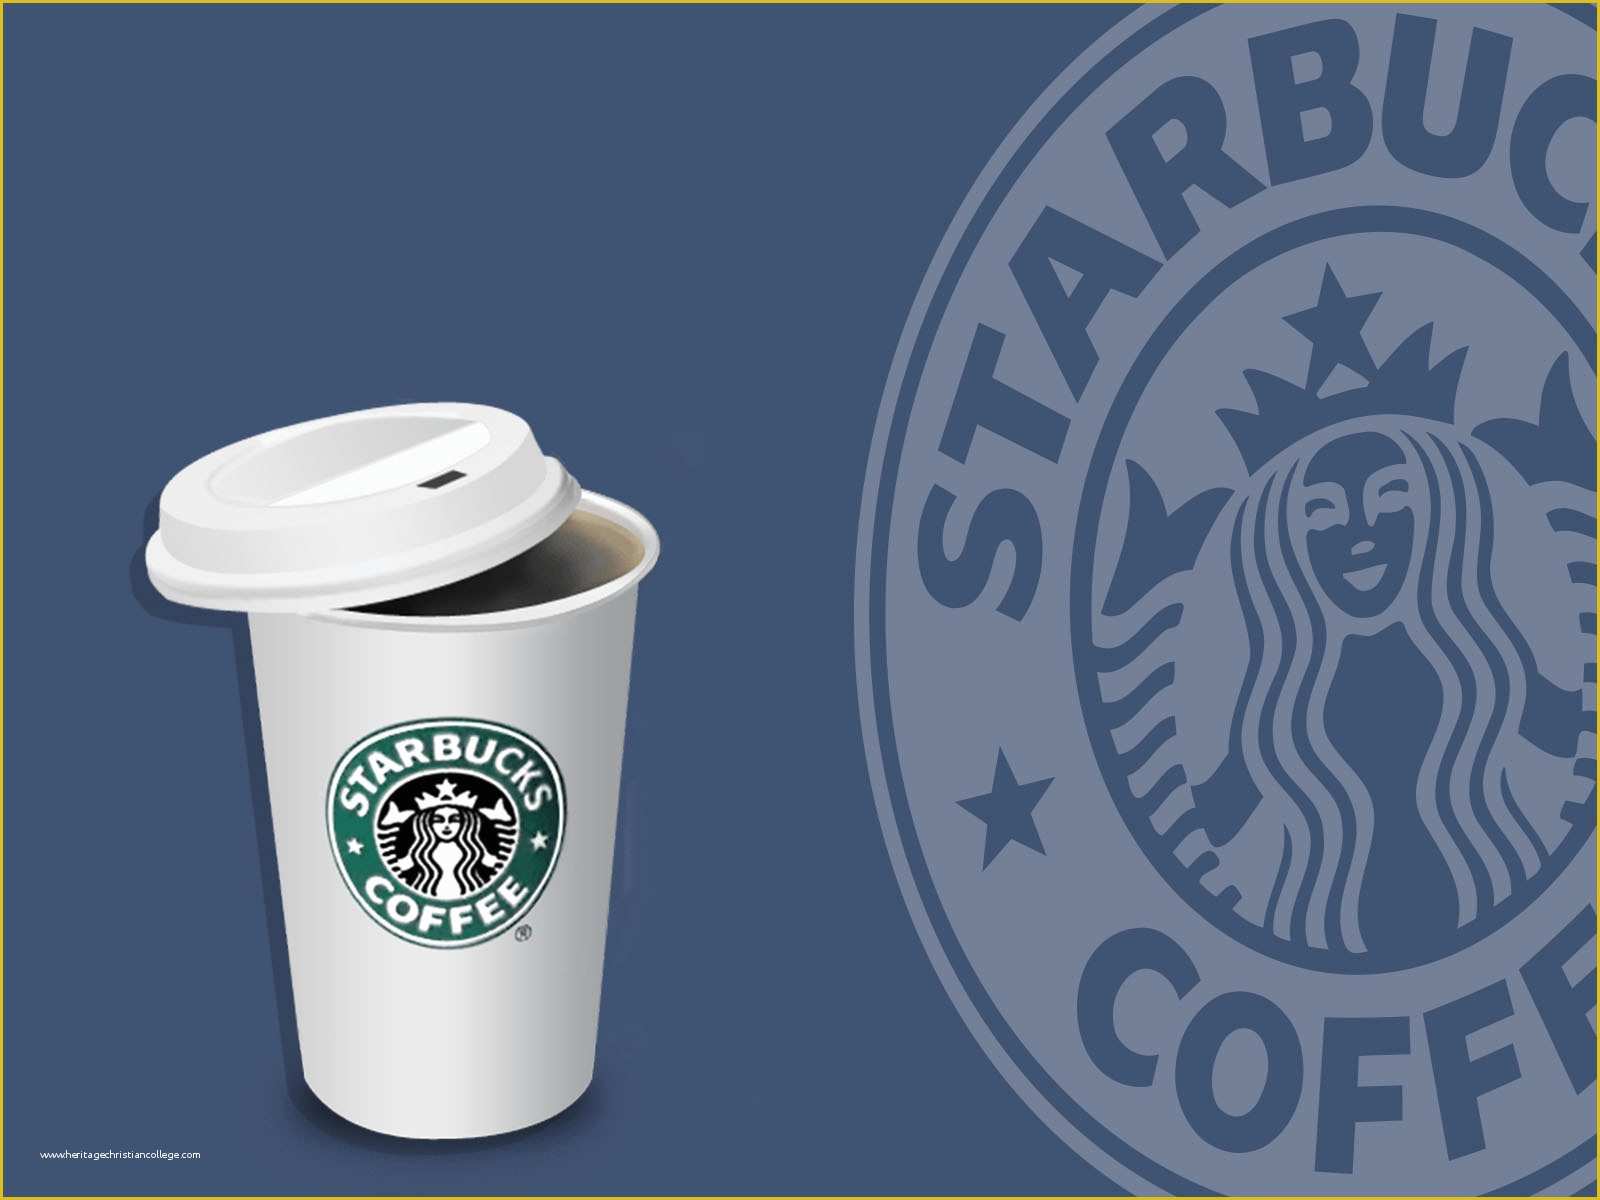 Free Starbucks Coffee Powerpoint Template Of Starbucks Coffee Backgrounds